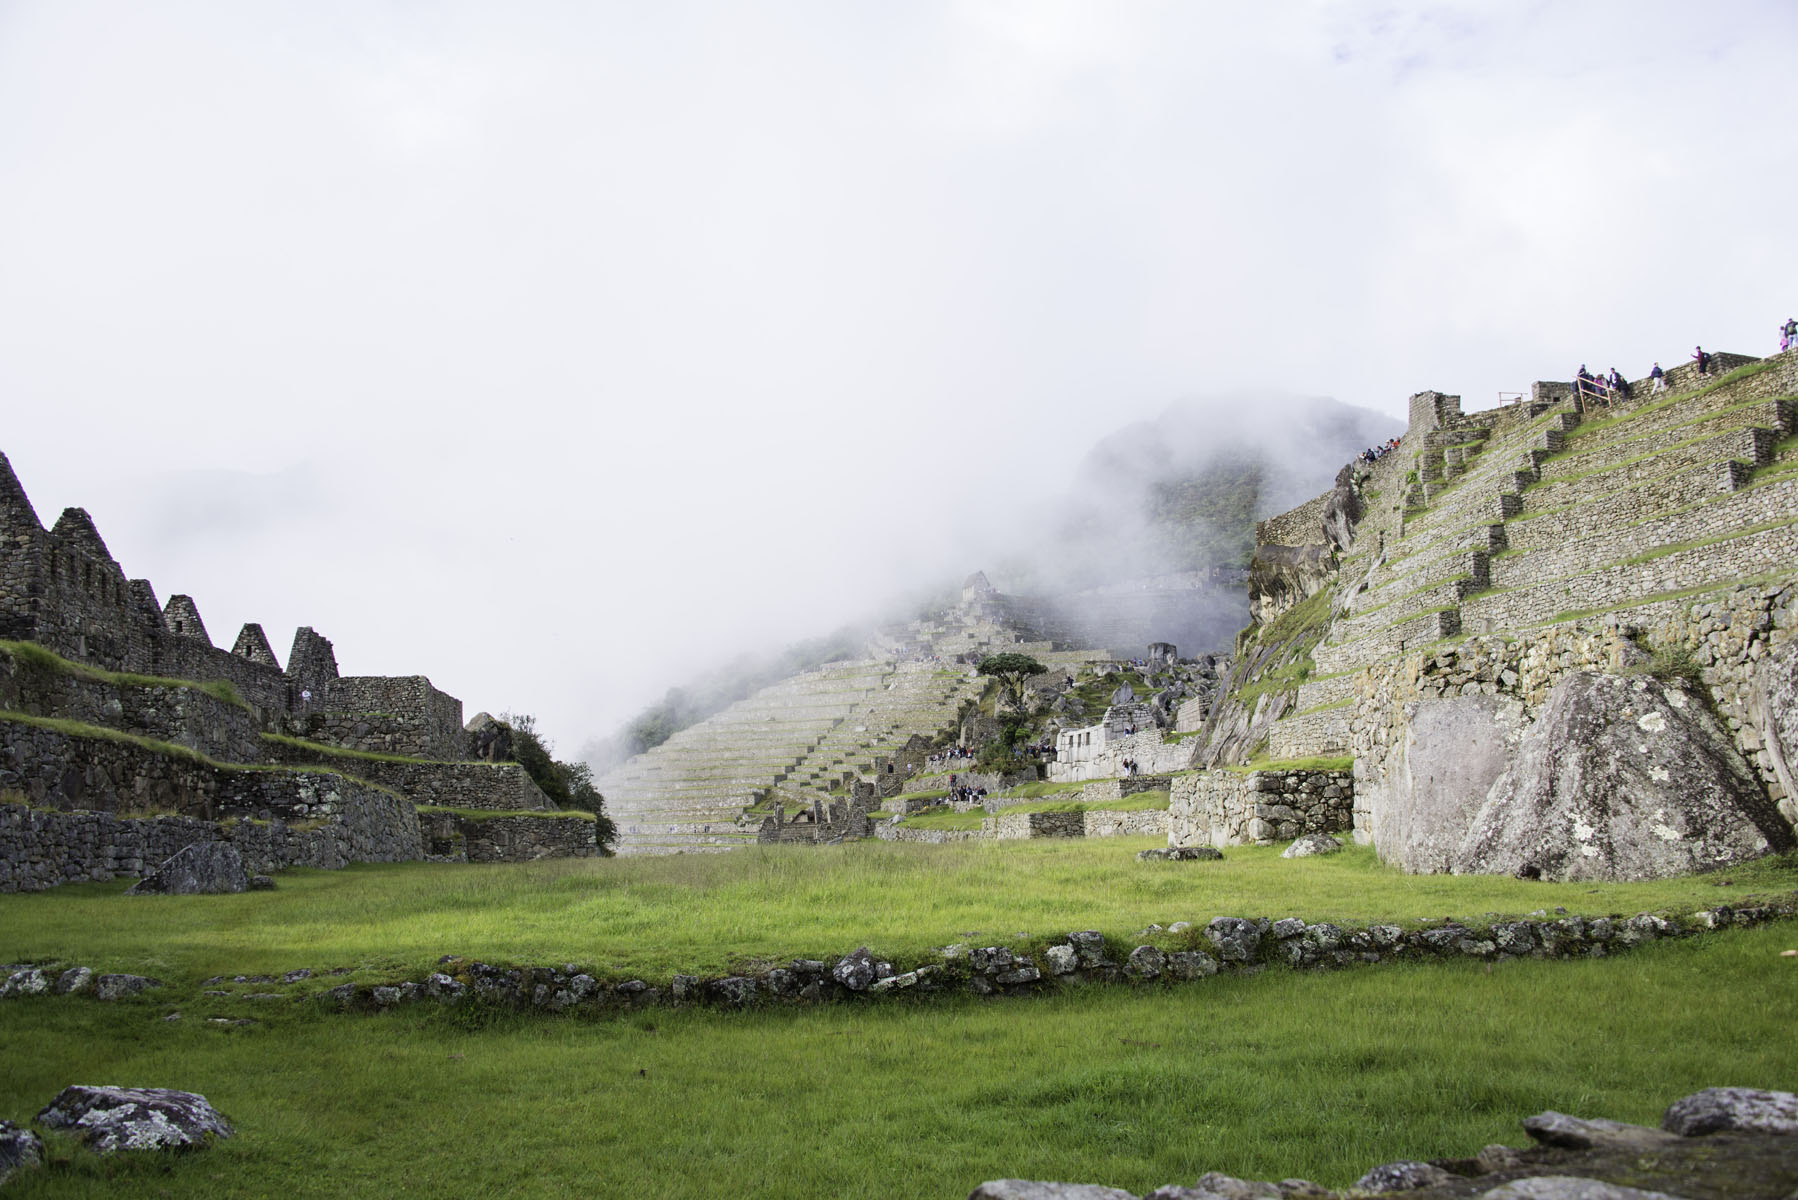 Overview of Incan City at Machu Picchu